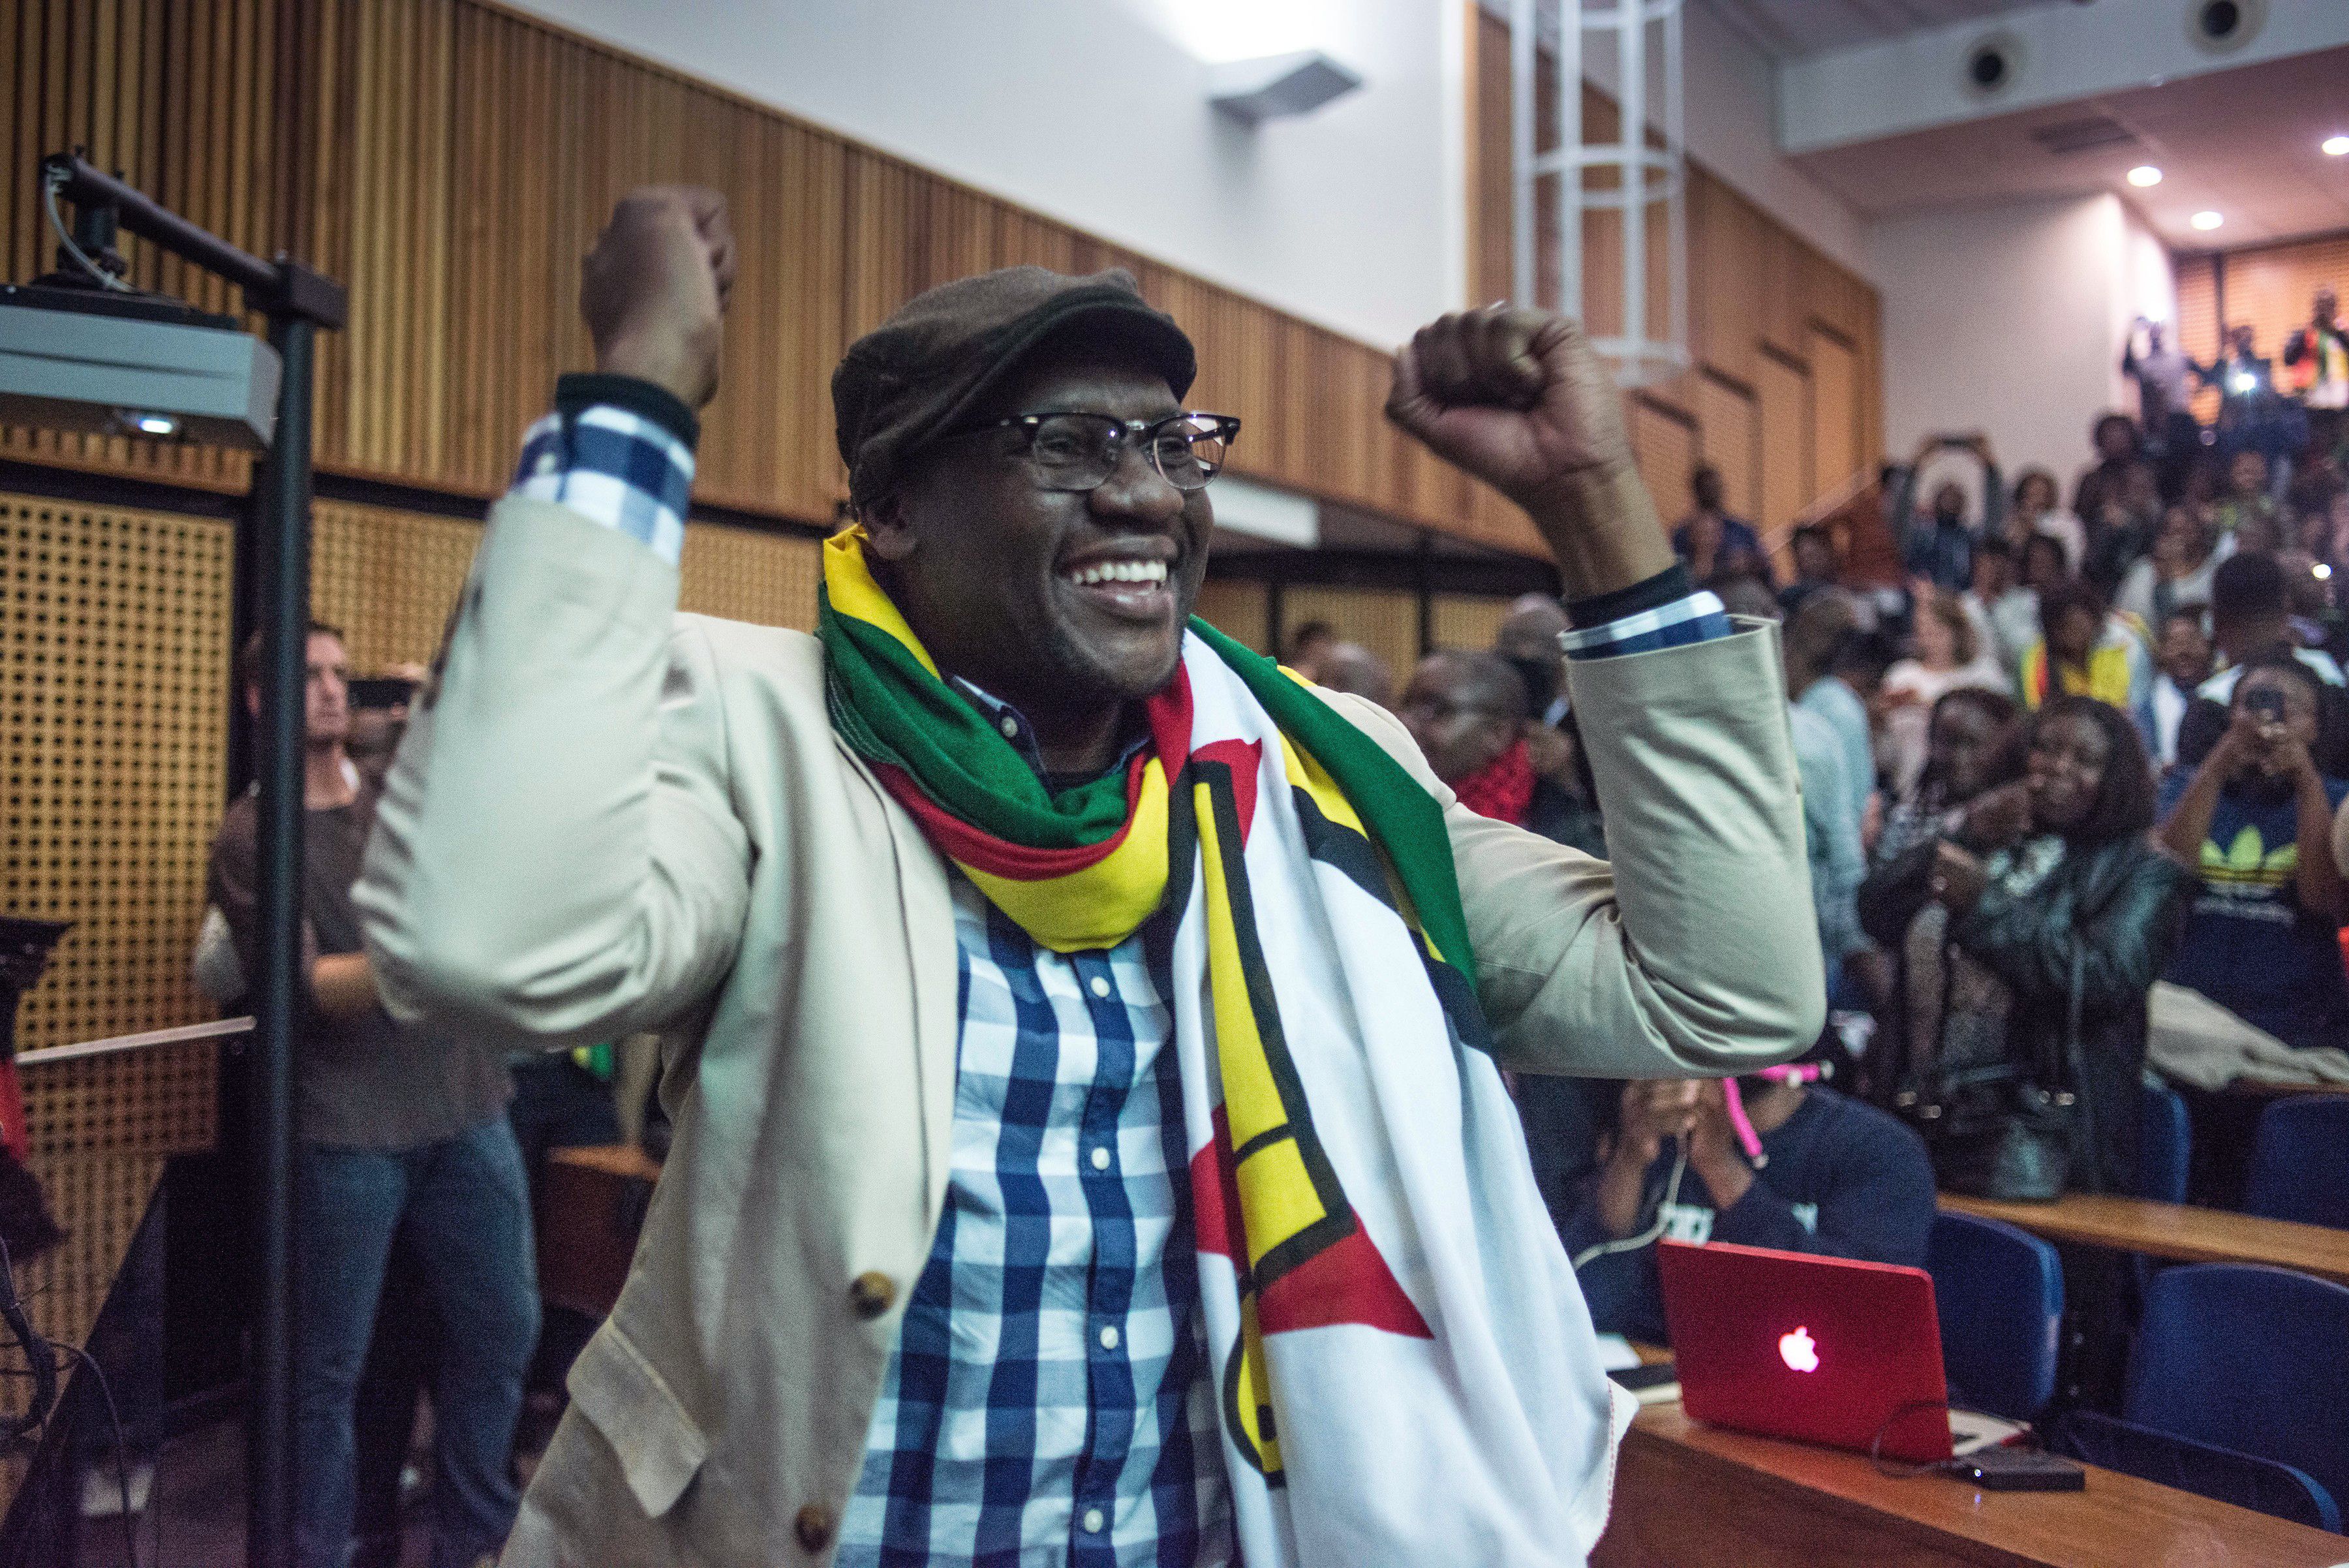 Zimbabwean Pastor Evan Mawarire gestures after addressing students during a lecture at Wits University in Johannesburg, on July 28, 2016. (Mujahid Safodien—AFP/Getty Images)